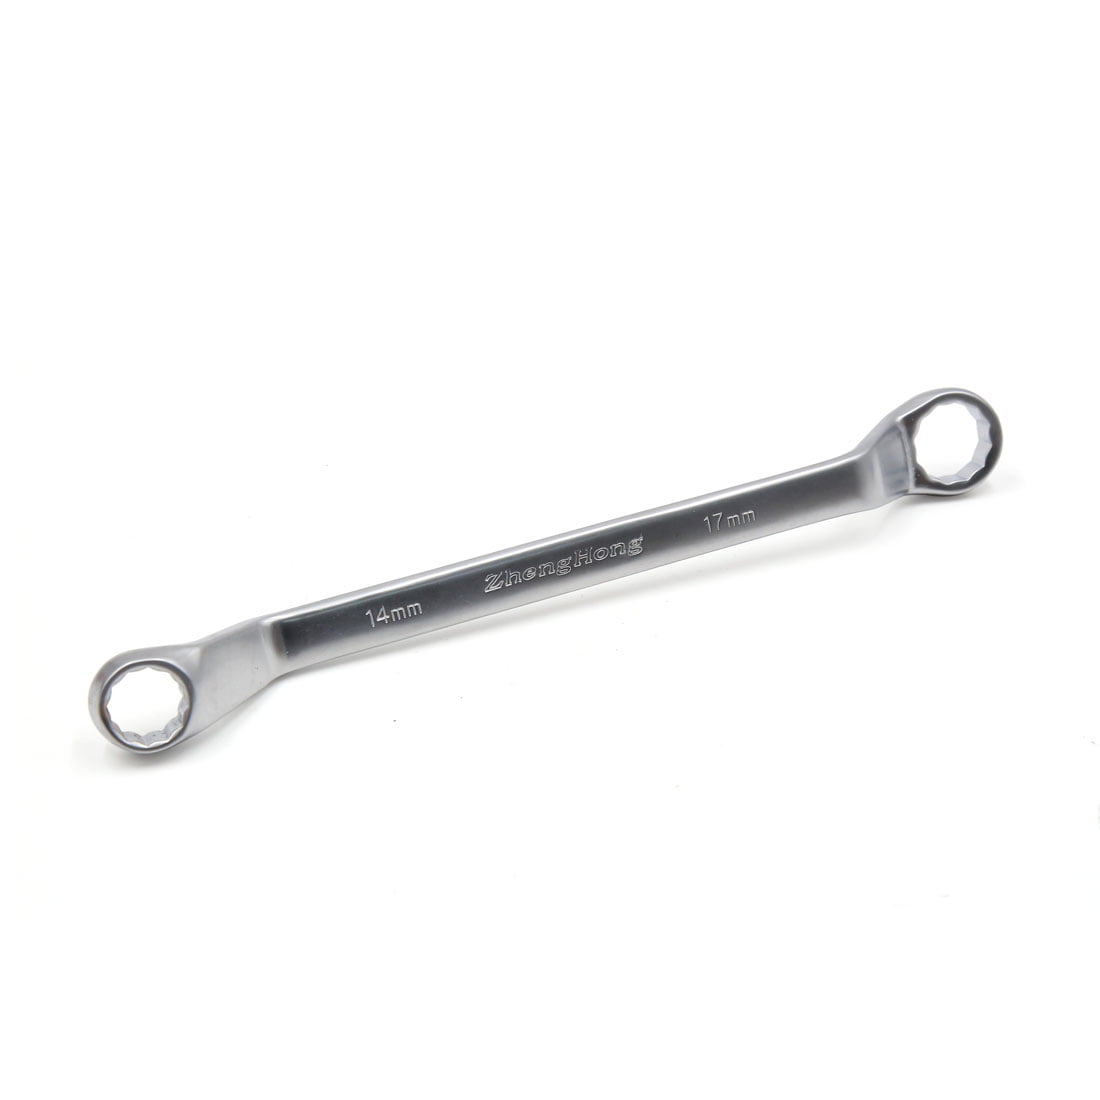 Ucland Chrome Plated Metal 14mm x 17mm Dual Open End Wrench Hand Tool 